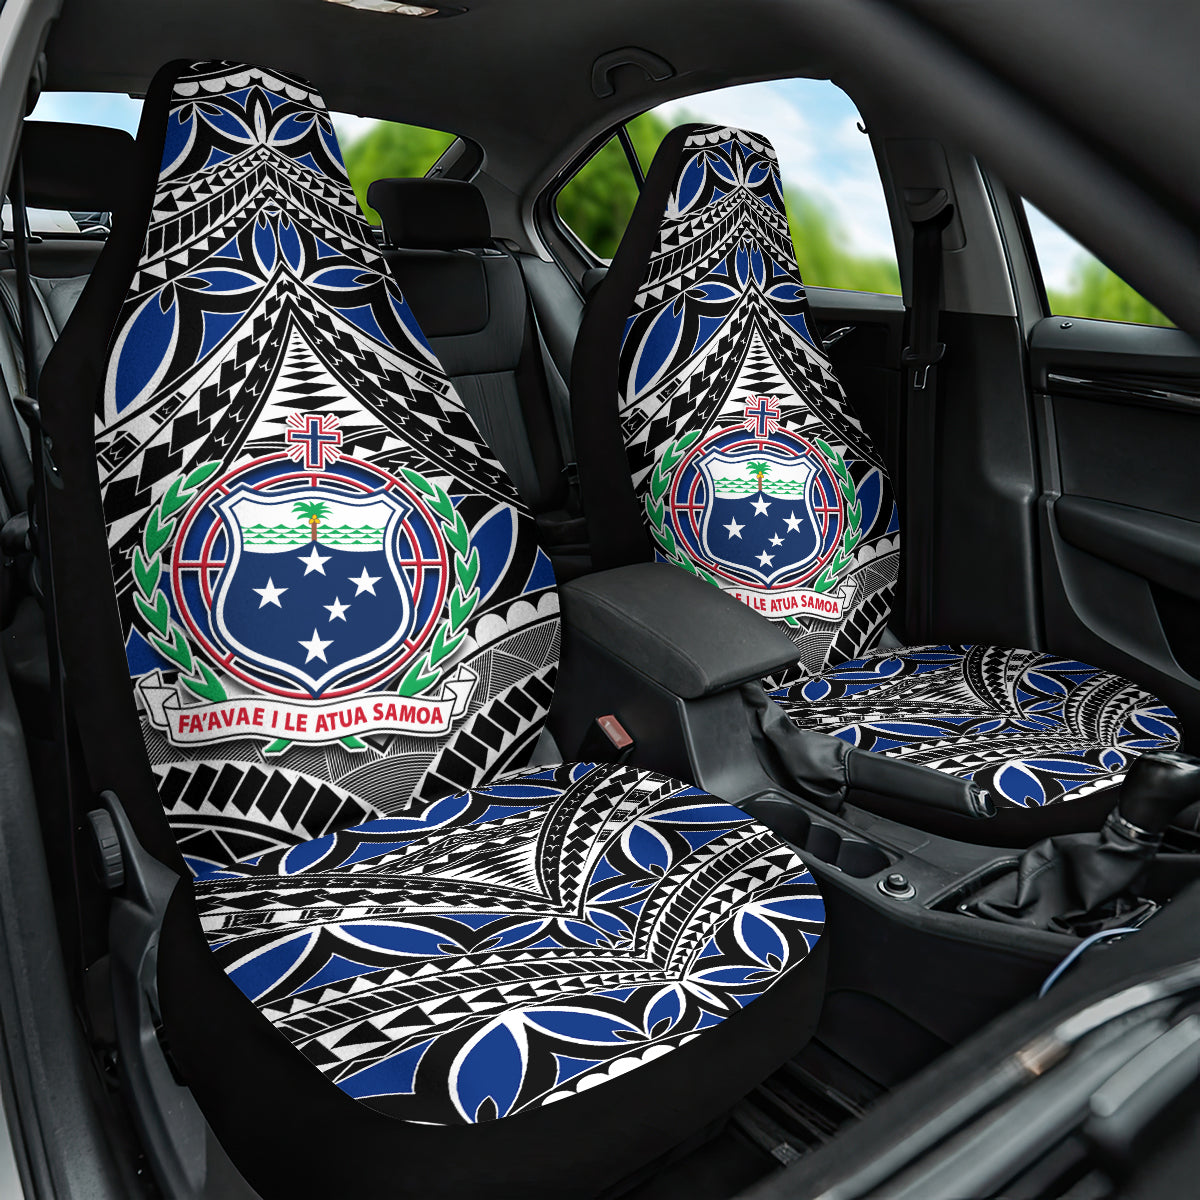 Samoa 685 Car Seat Cover Samoan Coat Of Arms Simple Style LT14 One Size Blue - Polynesian Pride